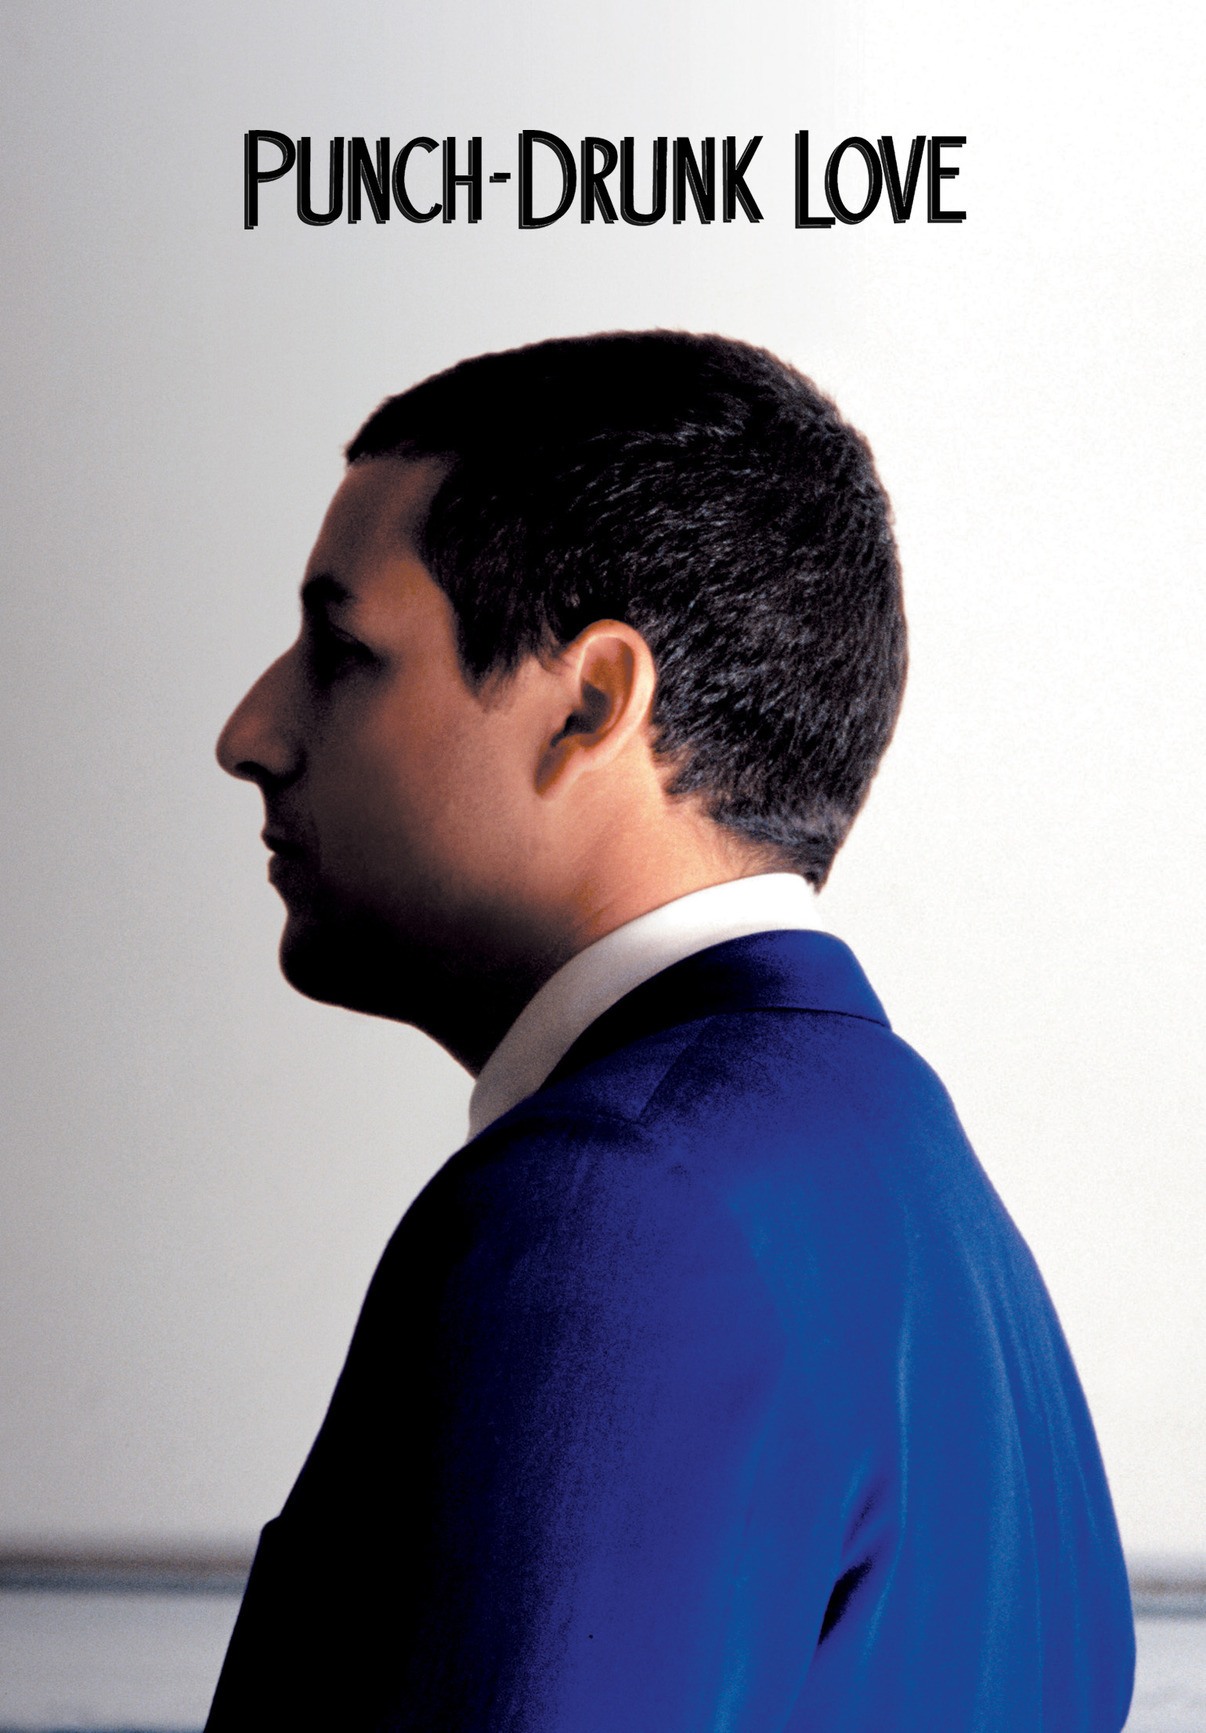 Punch-Drunk Love - Movie that will change your life